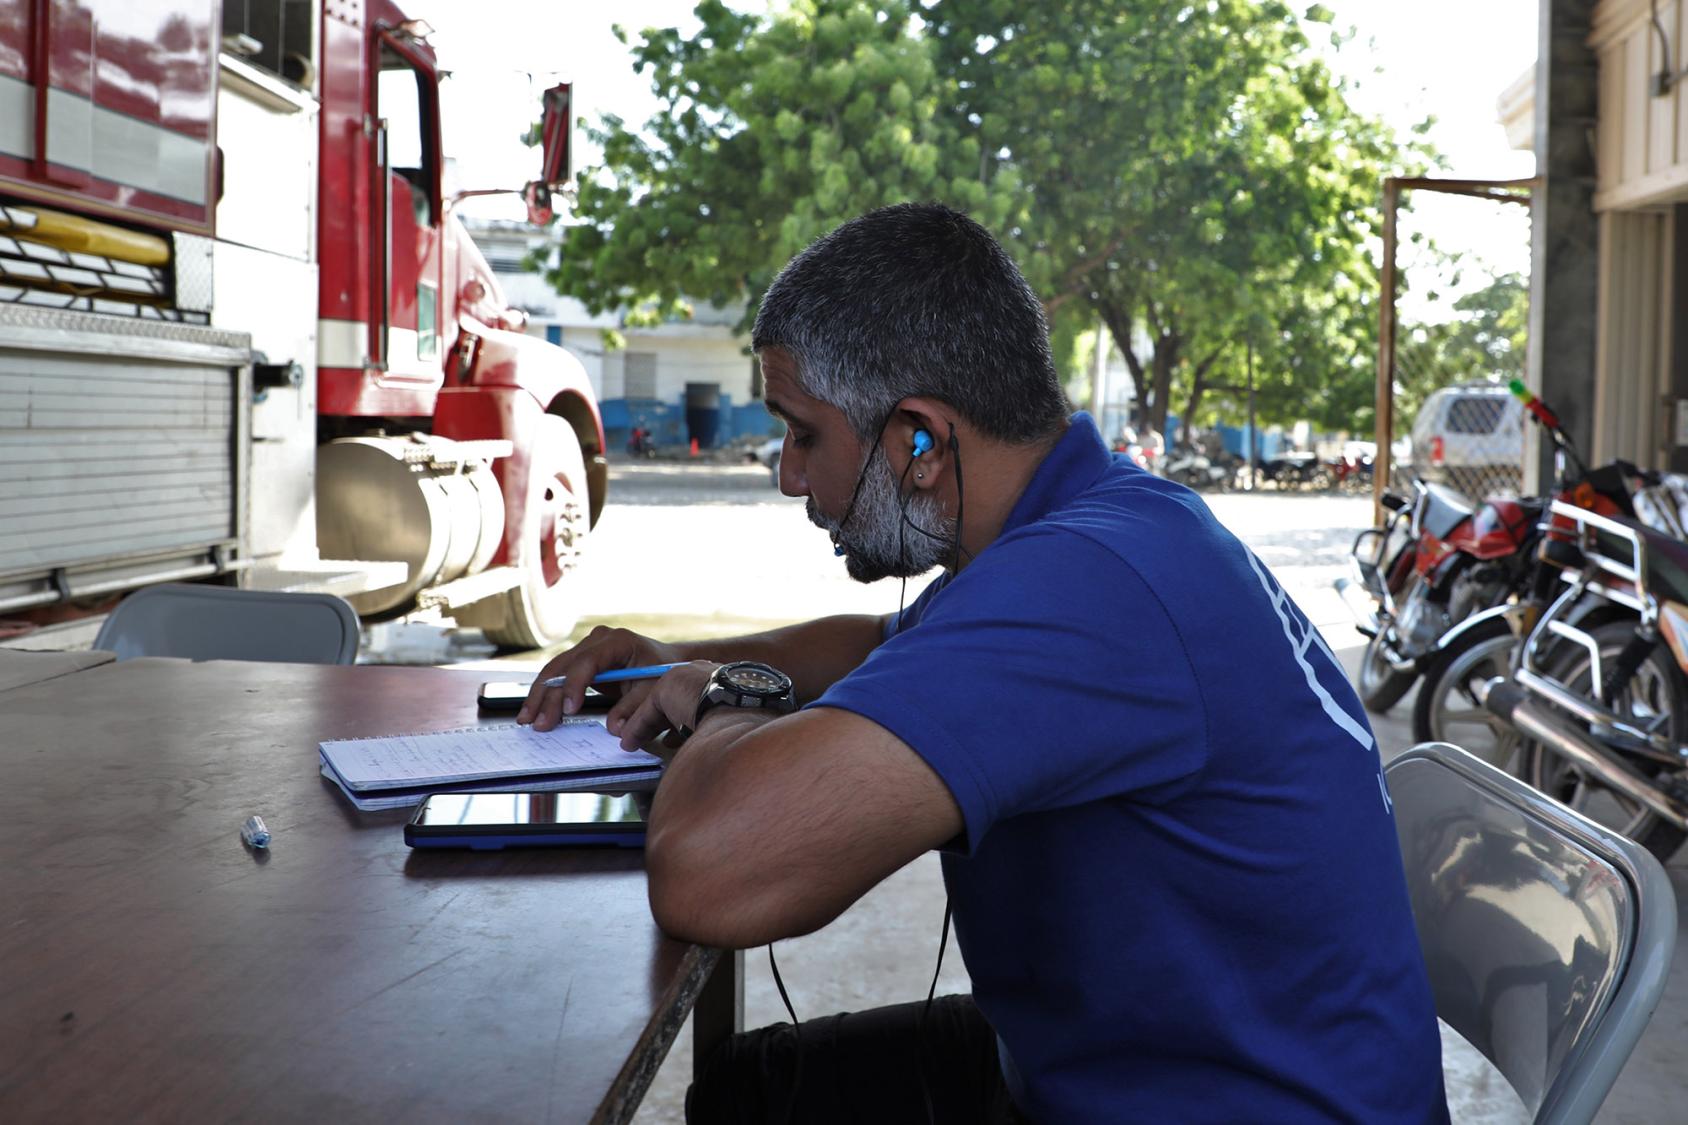 A man in a blue shirt looks down at a mobile phone and paperwork inside a fire station. 